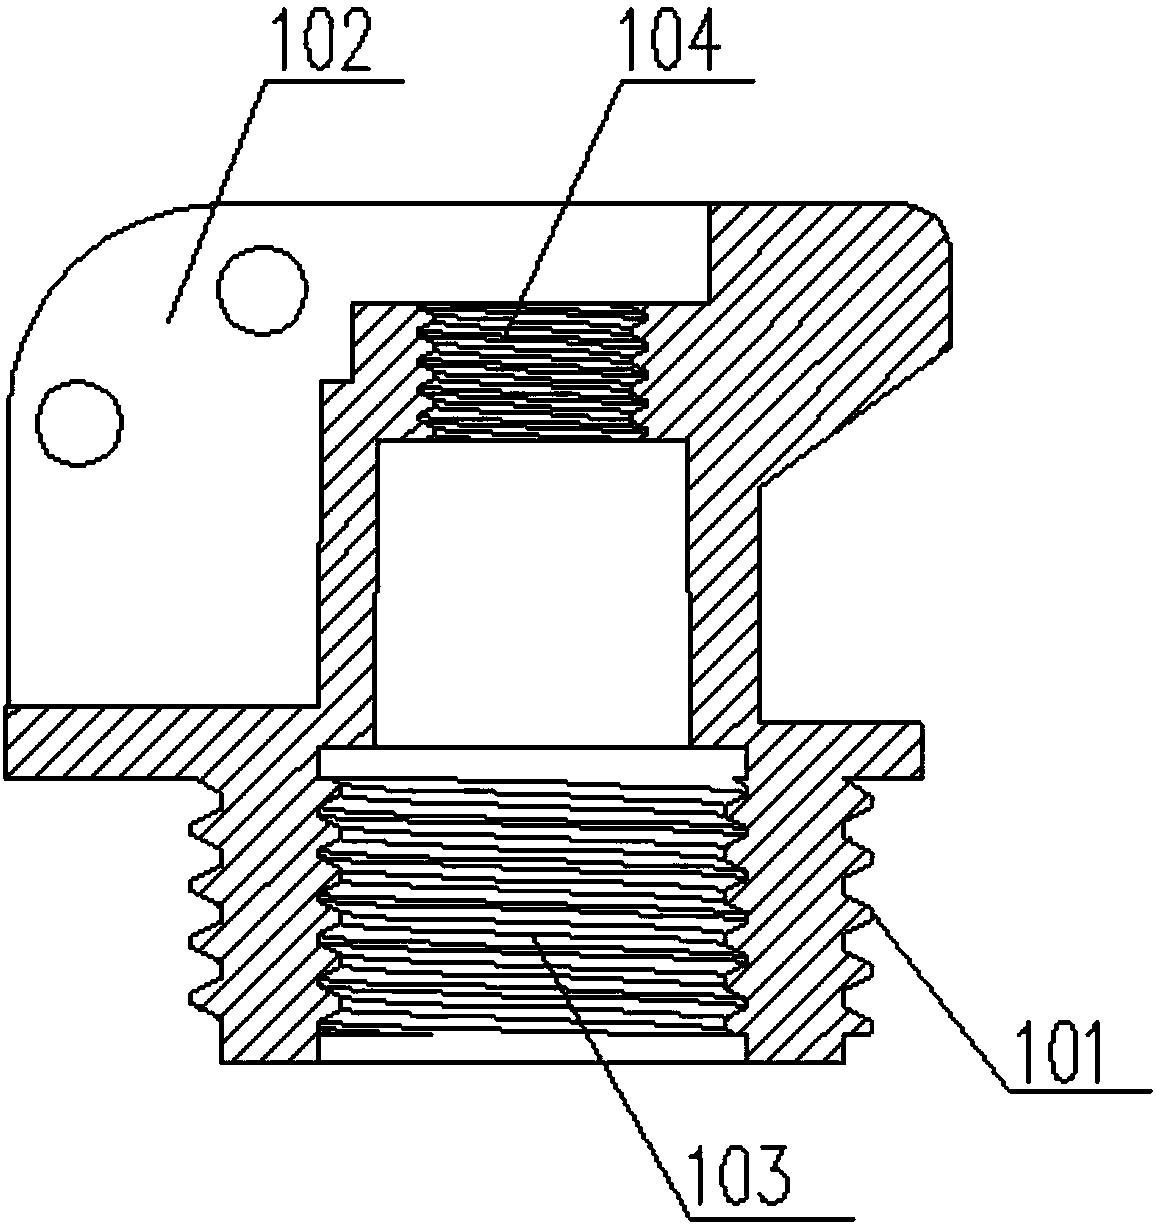 Injection molding device used for injection-molded component with zero rotating stop structure and double internal threads with different pitches